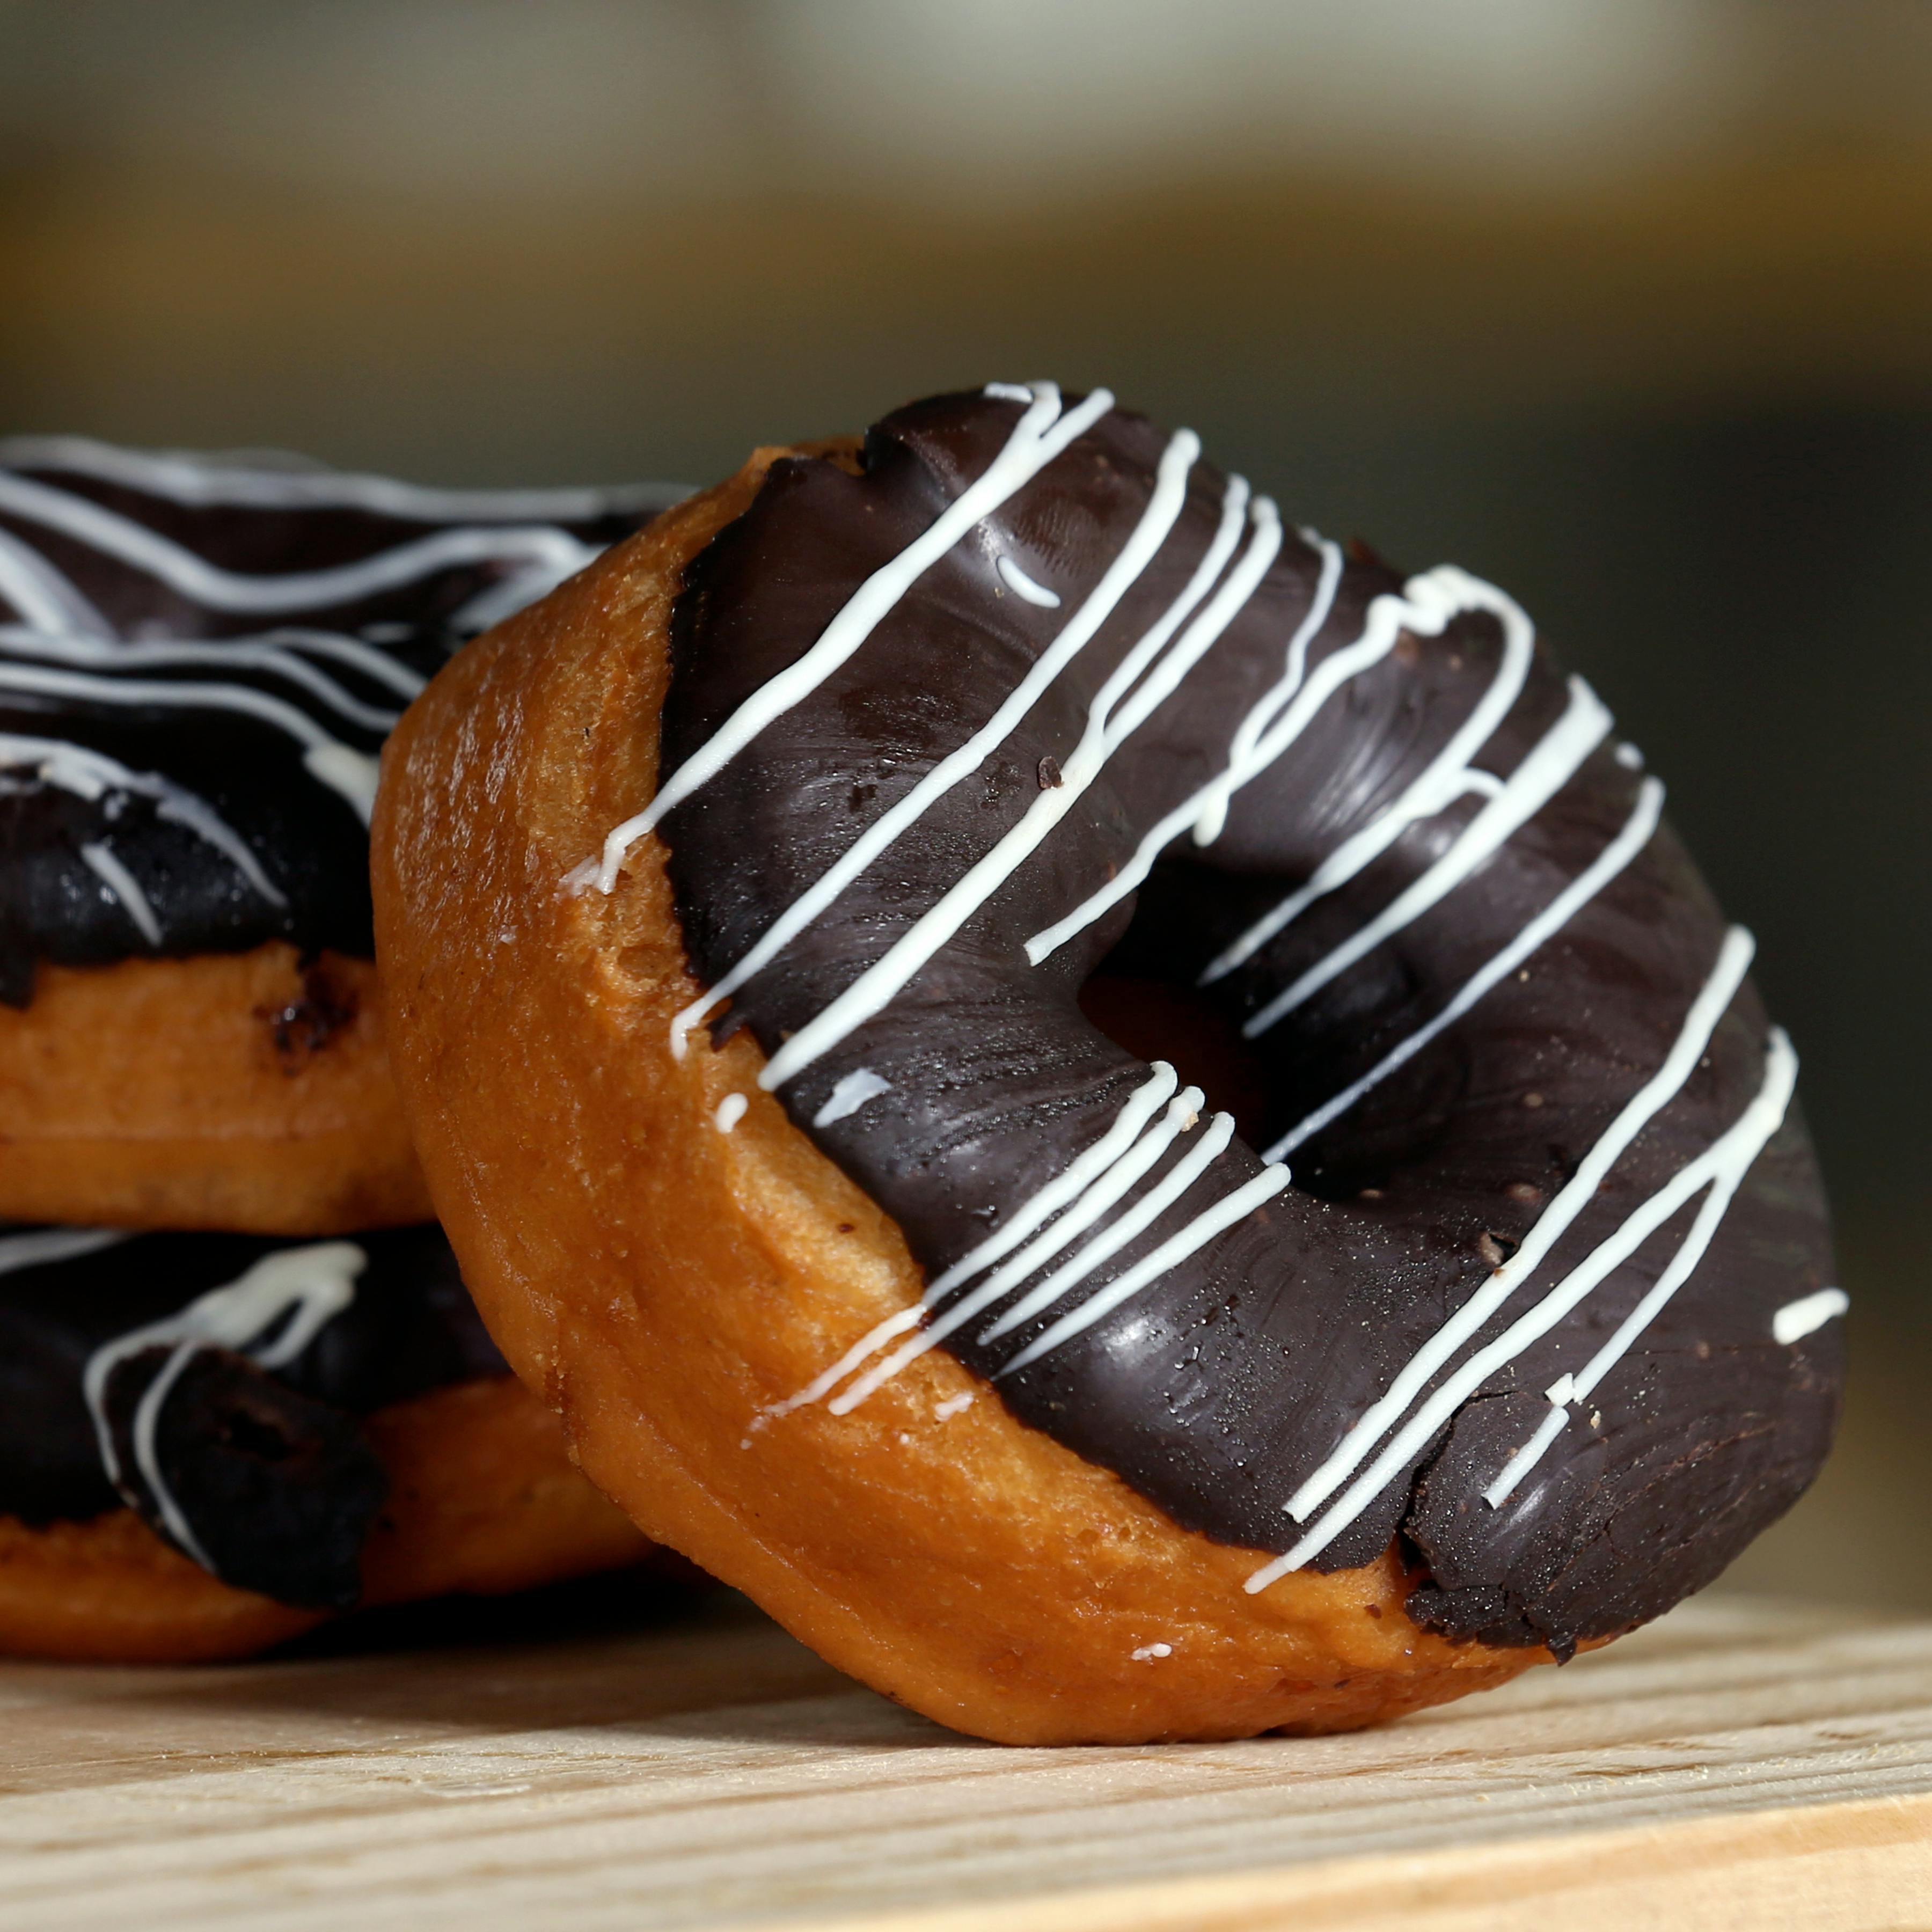 Donuts Photos, Download The BEST Free Donuts Stock Photos & HD Images